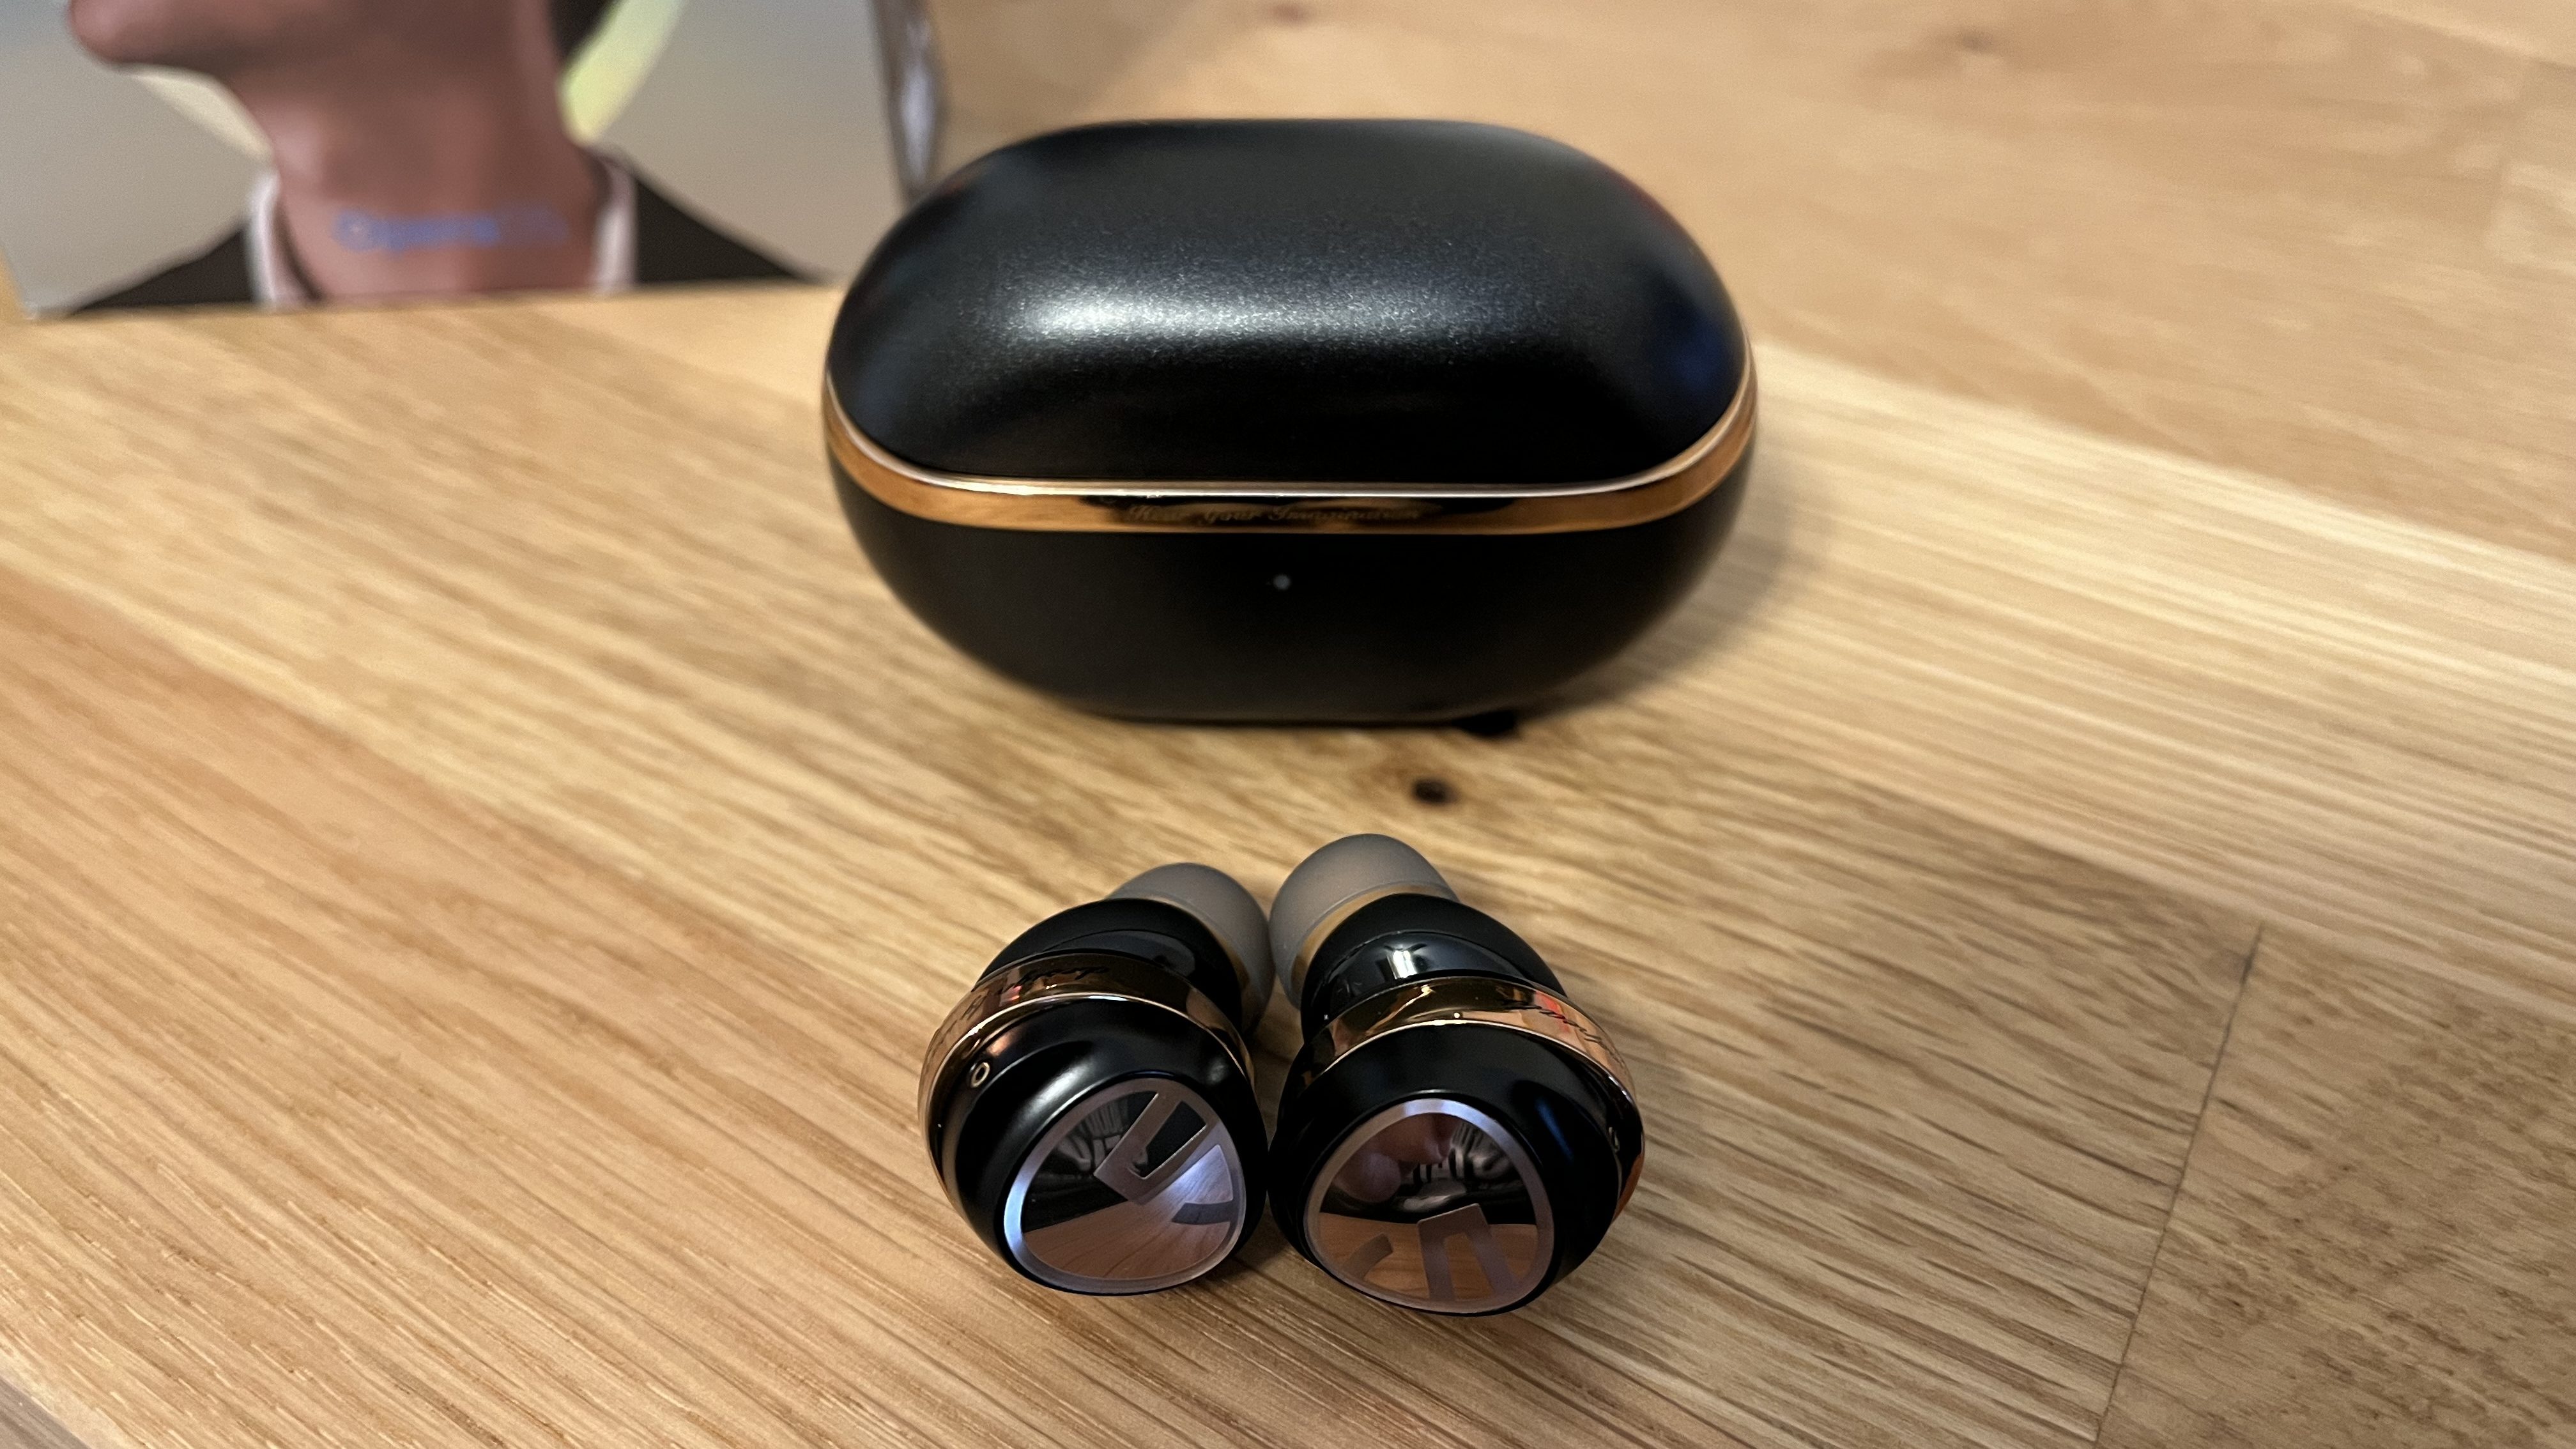 MEGA TEST: Which are the best SoundPEATS earbuds?